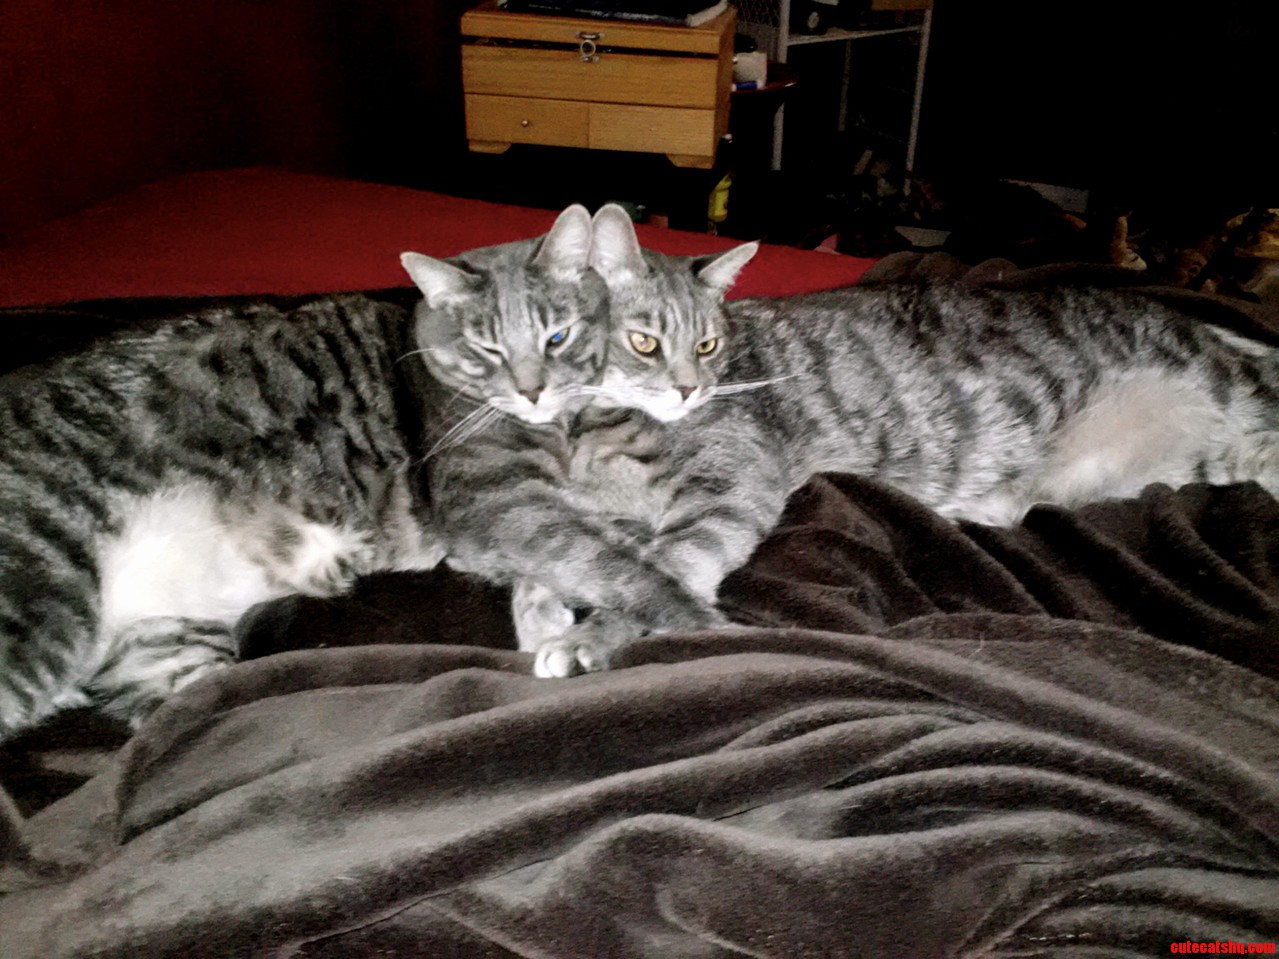 My Twin Cats Cuddle Like This Everyday.